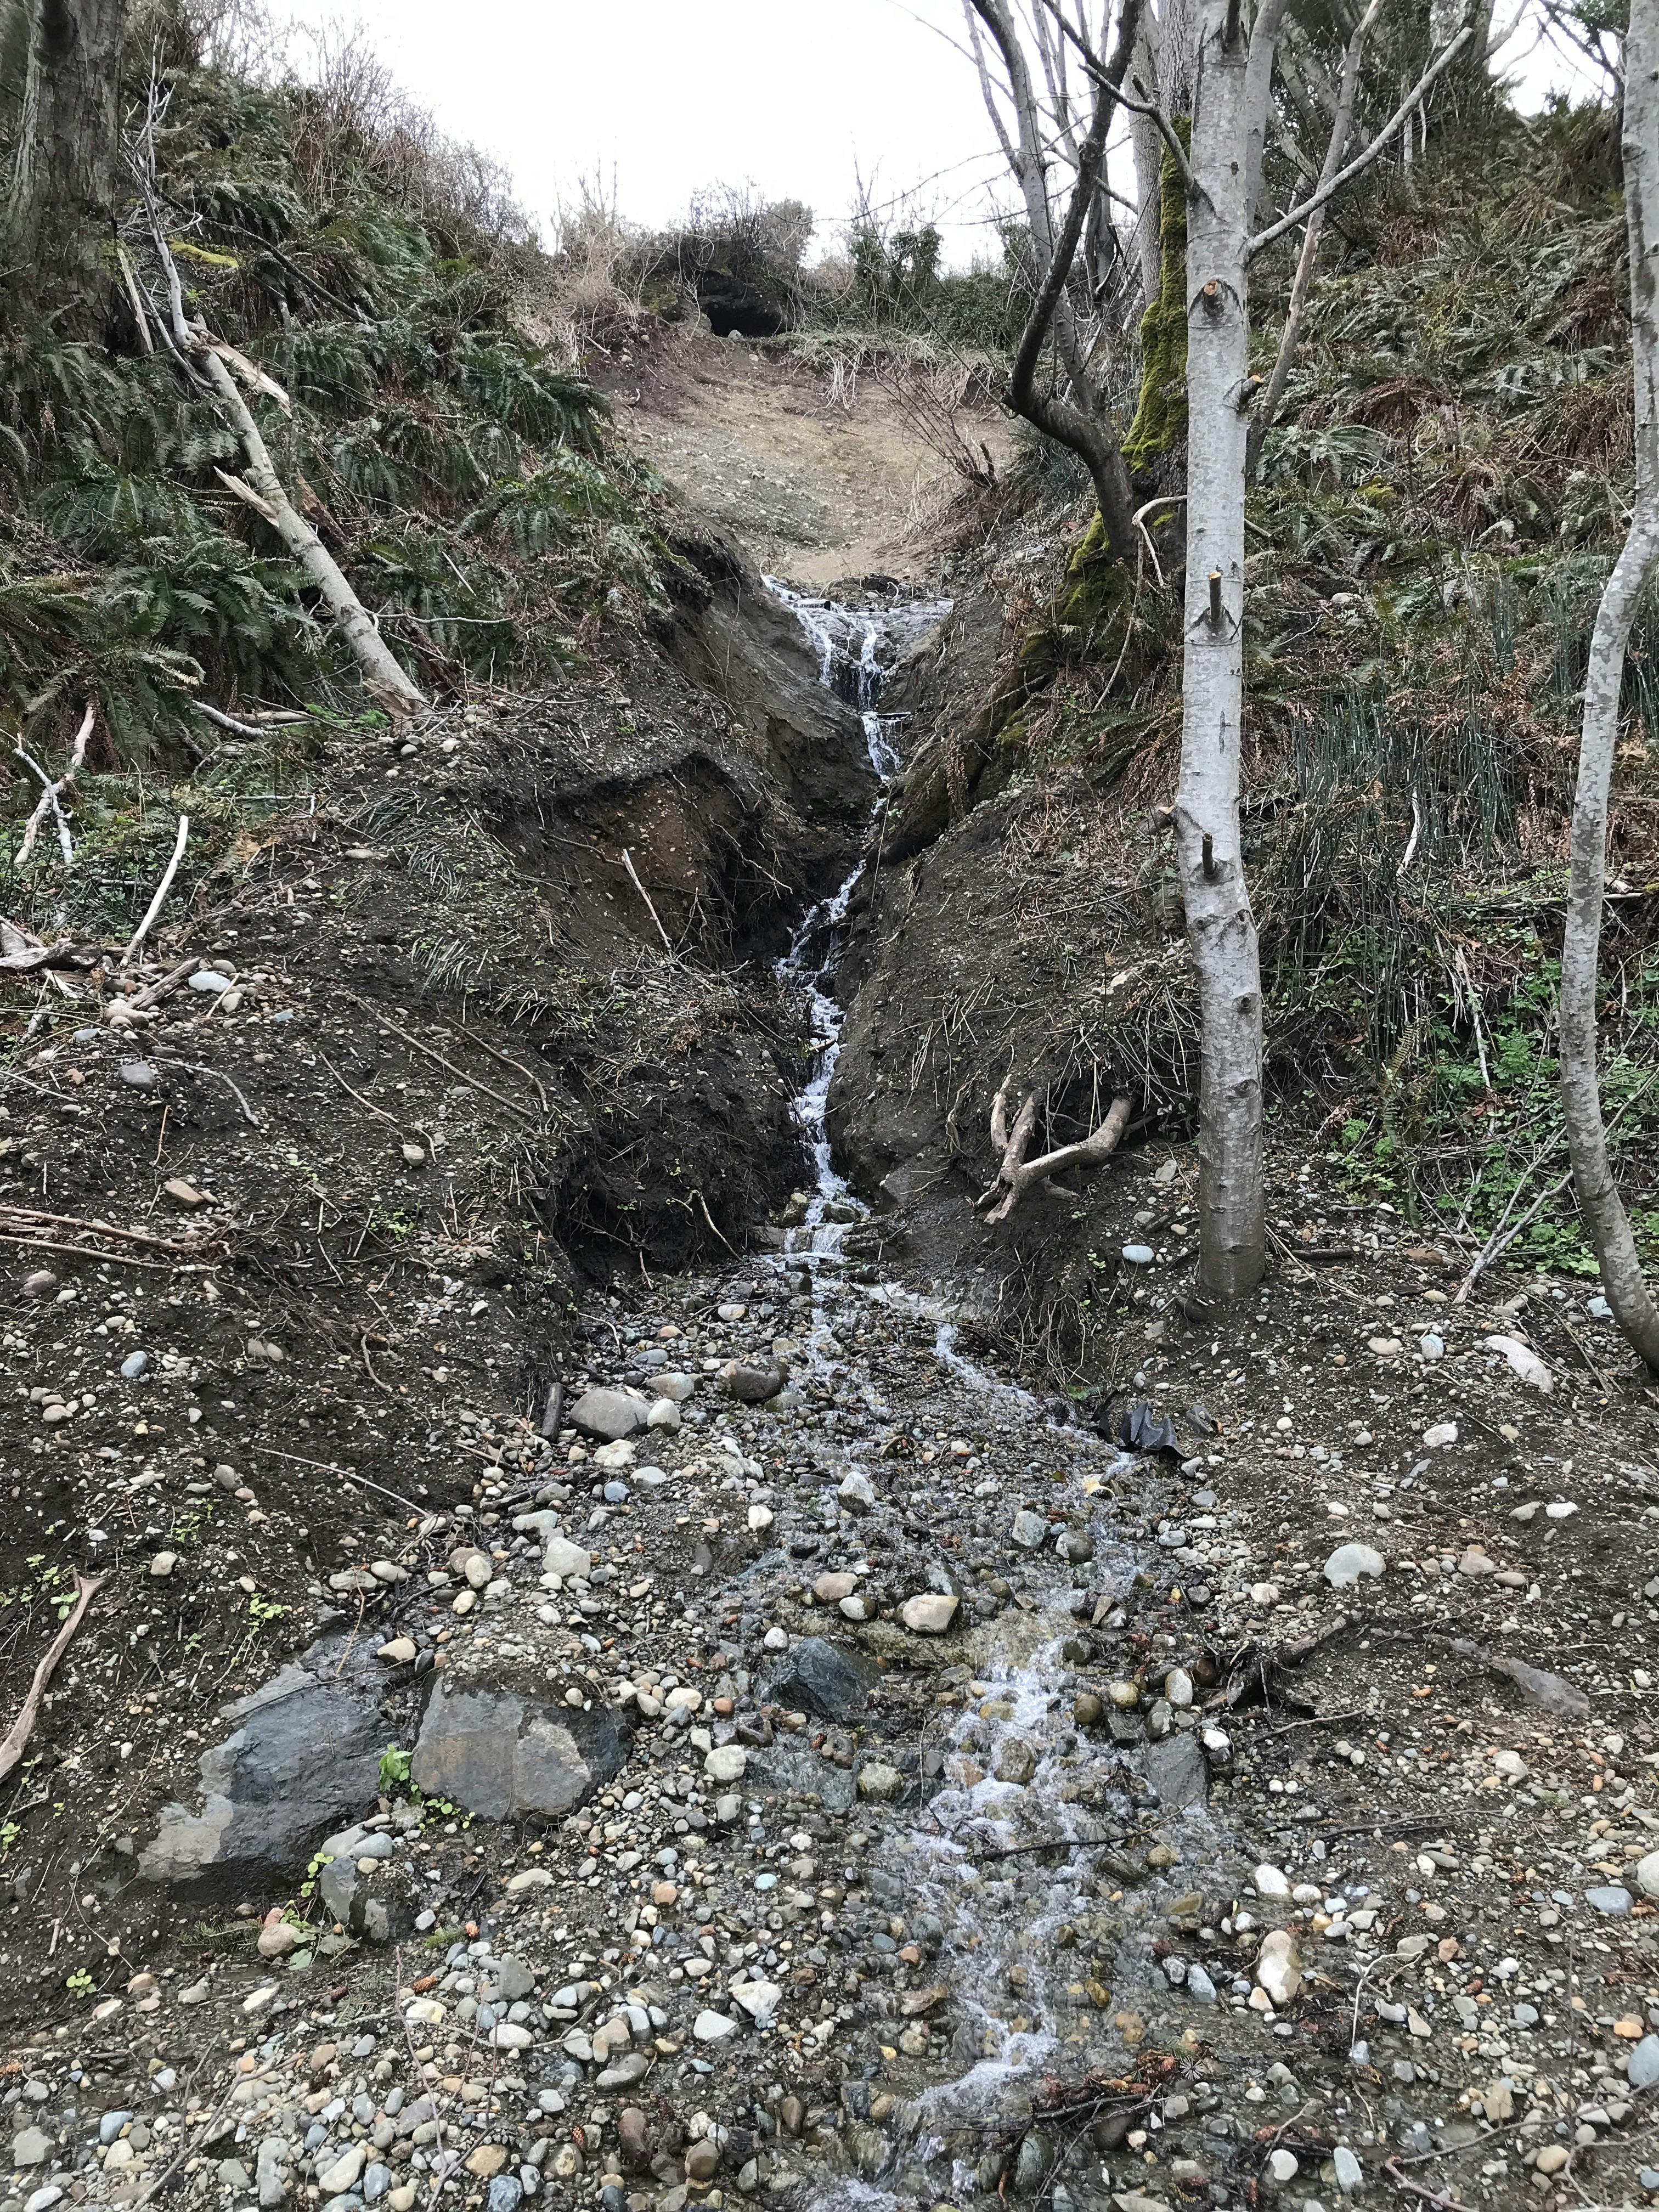 An example of a spring creating soil erosion